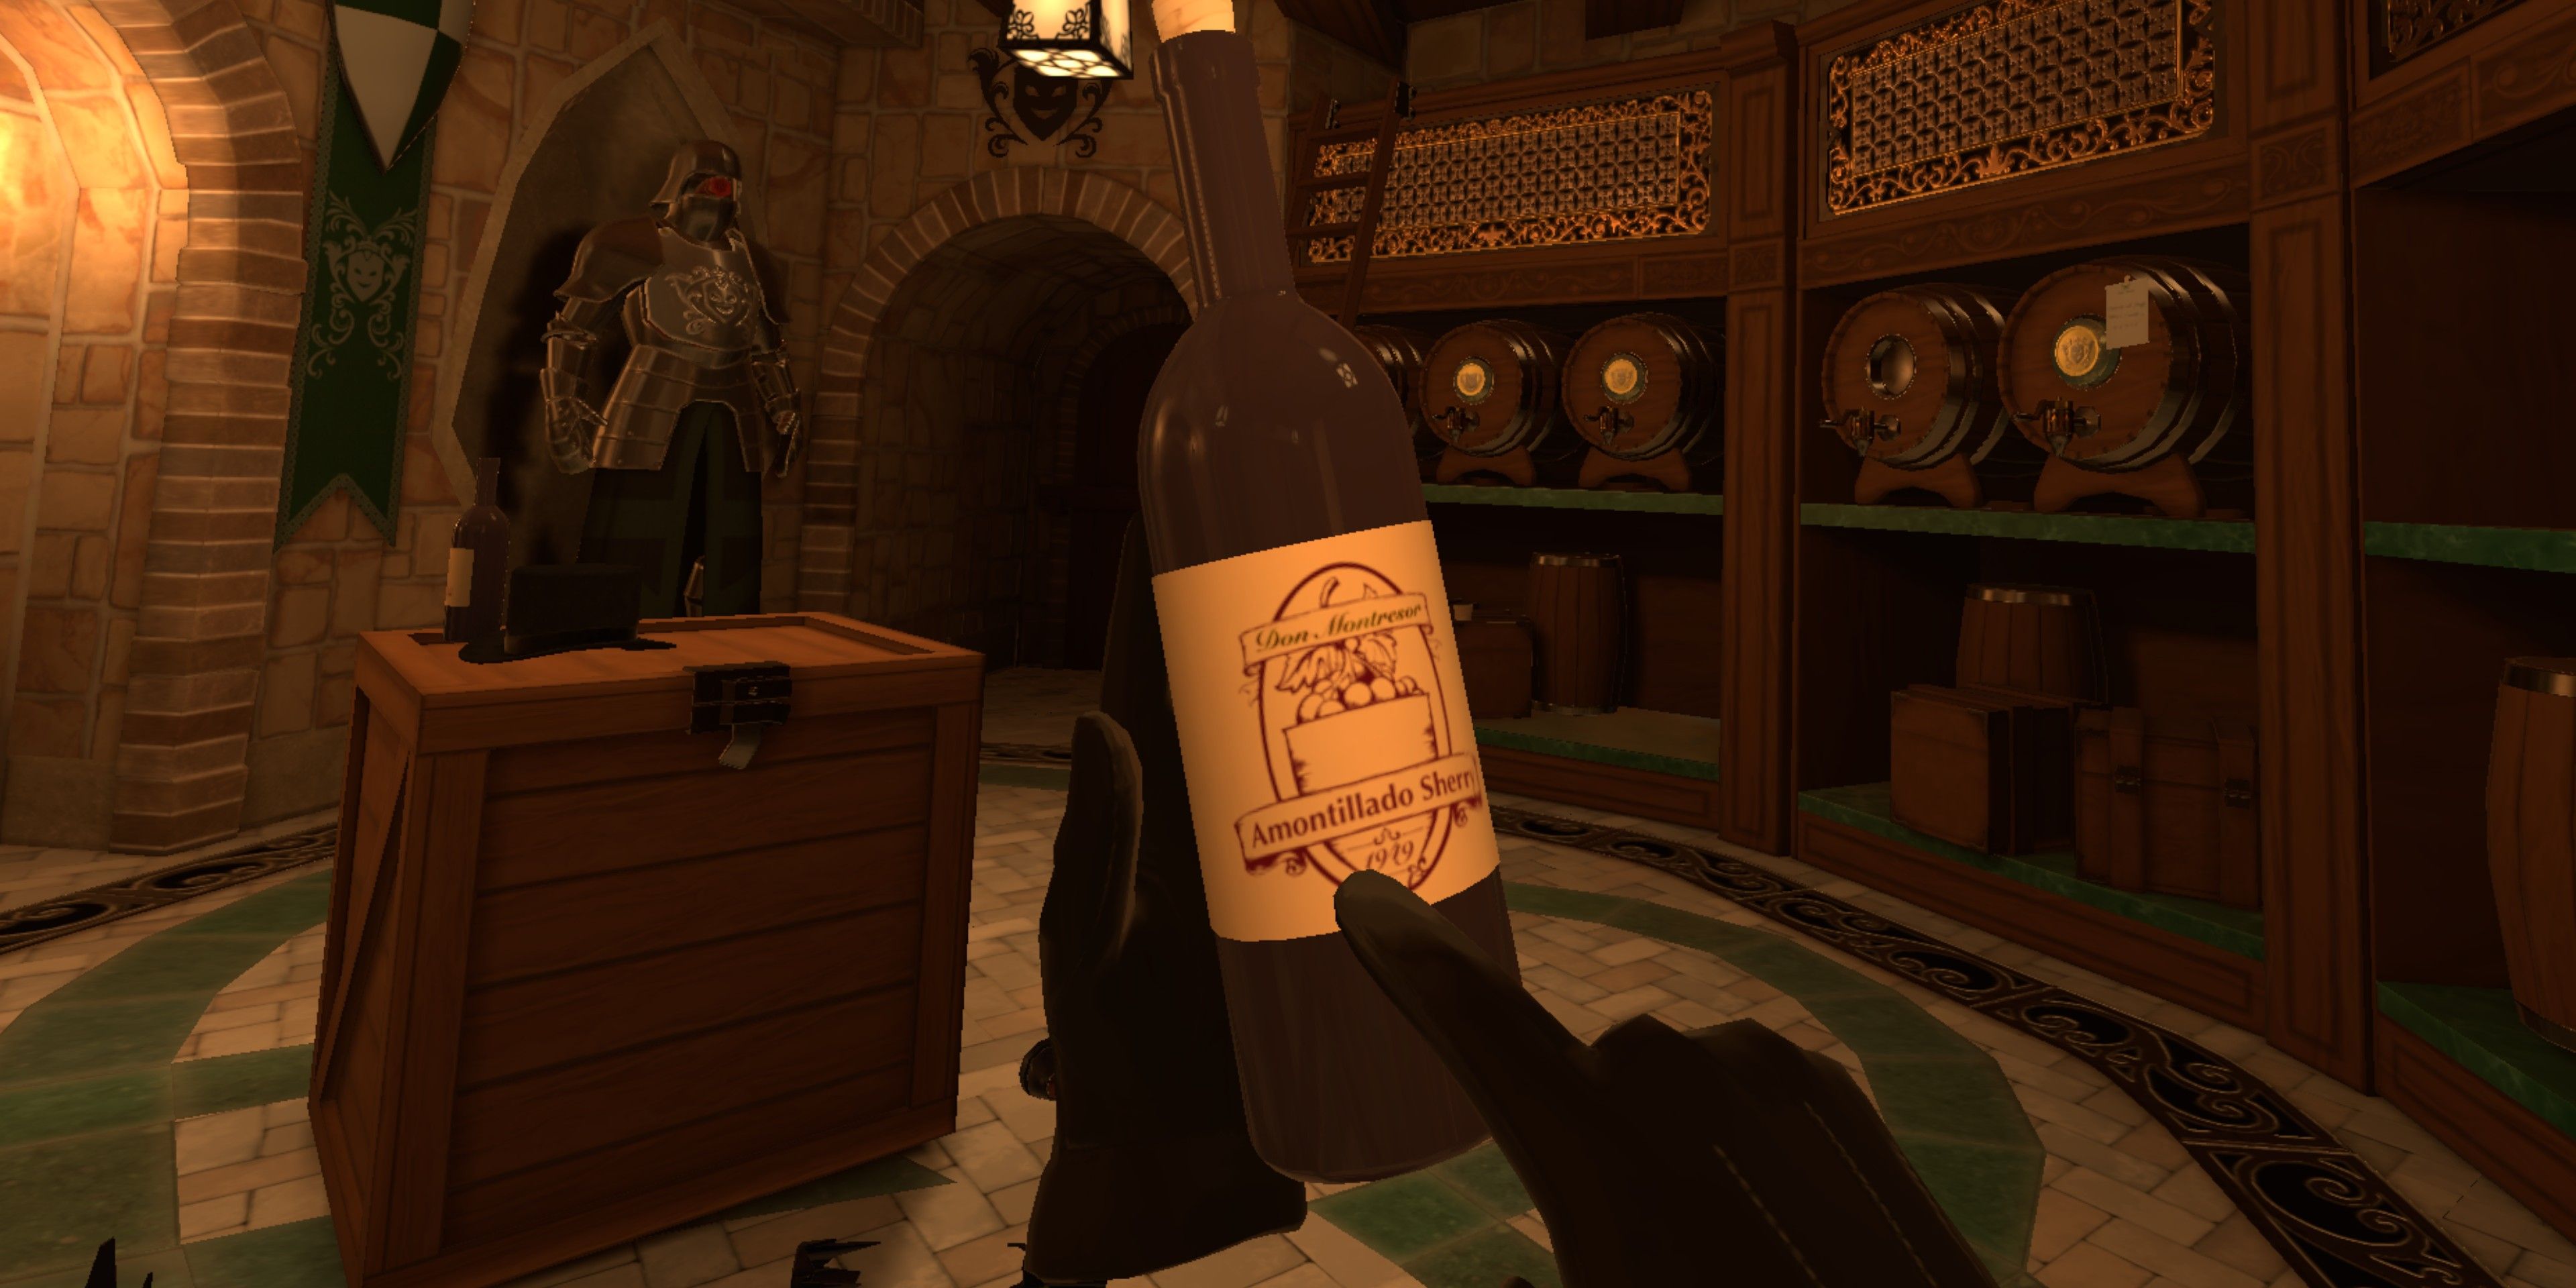 In-game view of I Expect You To Die 2 showing disembodied hand holding a bottle of wine in a wine cellar.